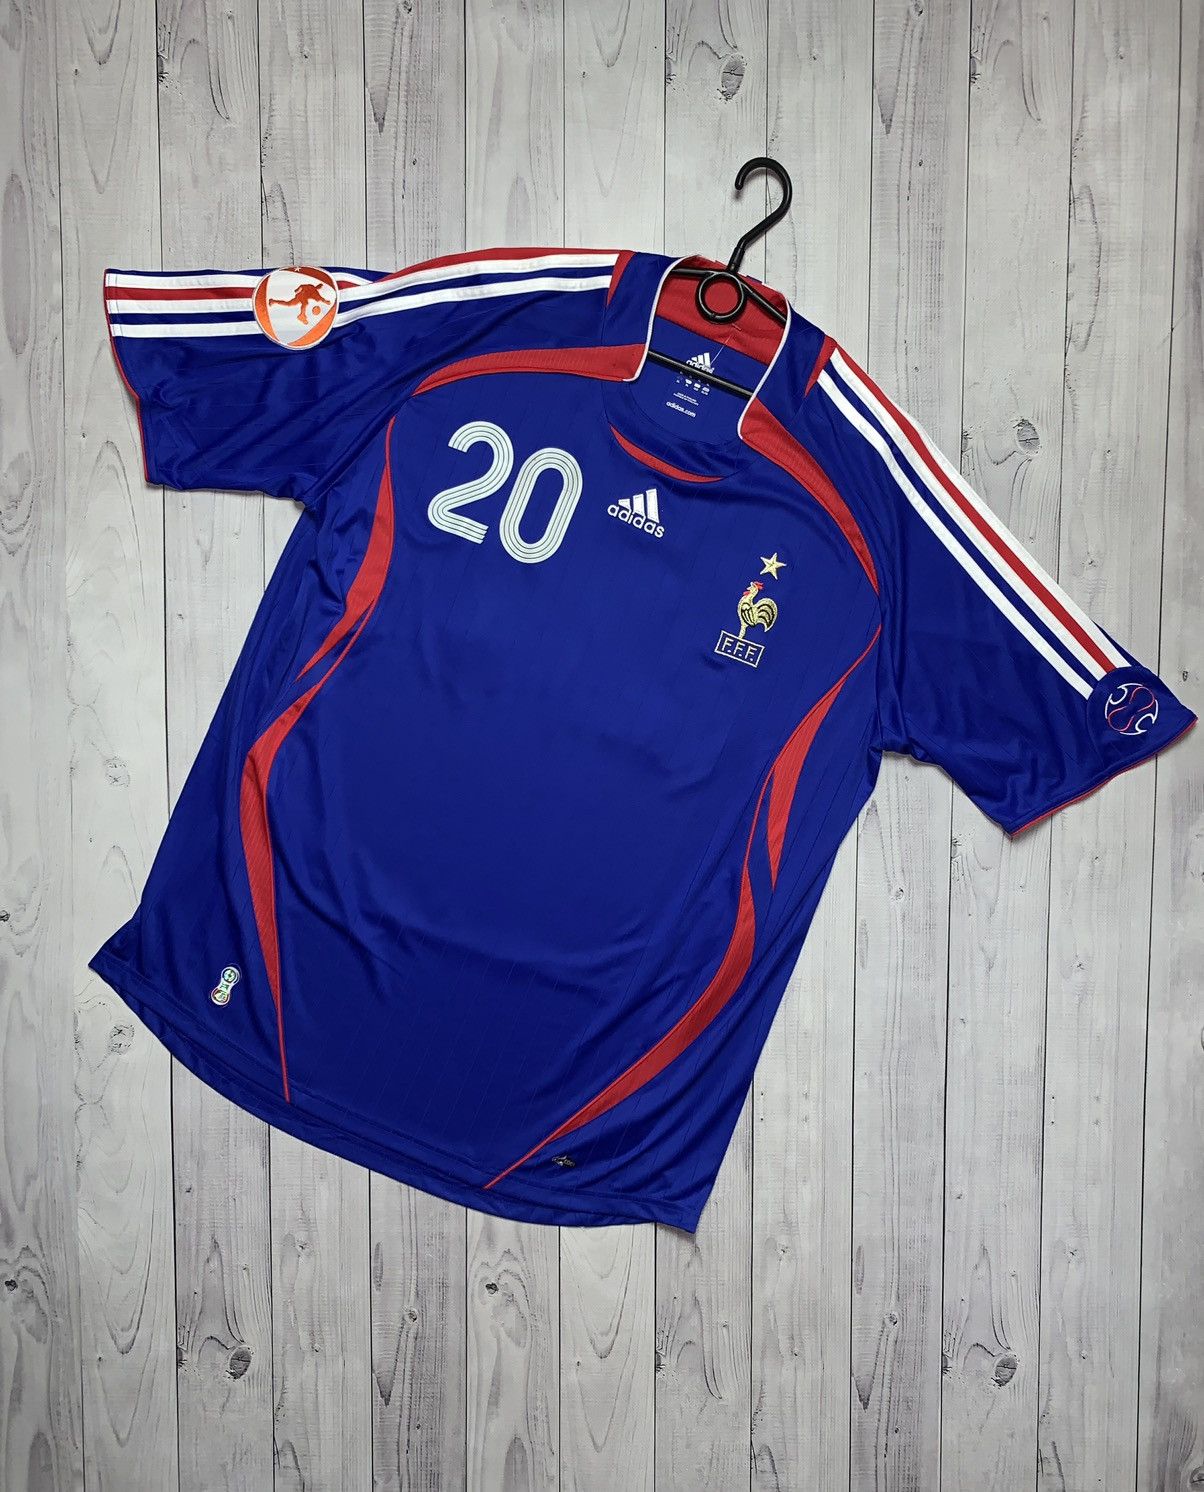 Pre-owned Adidas X Soccer Jersey Vintage France Soccer Jersey Adidas 20 Trezeguet Size Xl In Blue